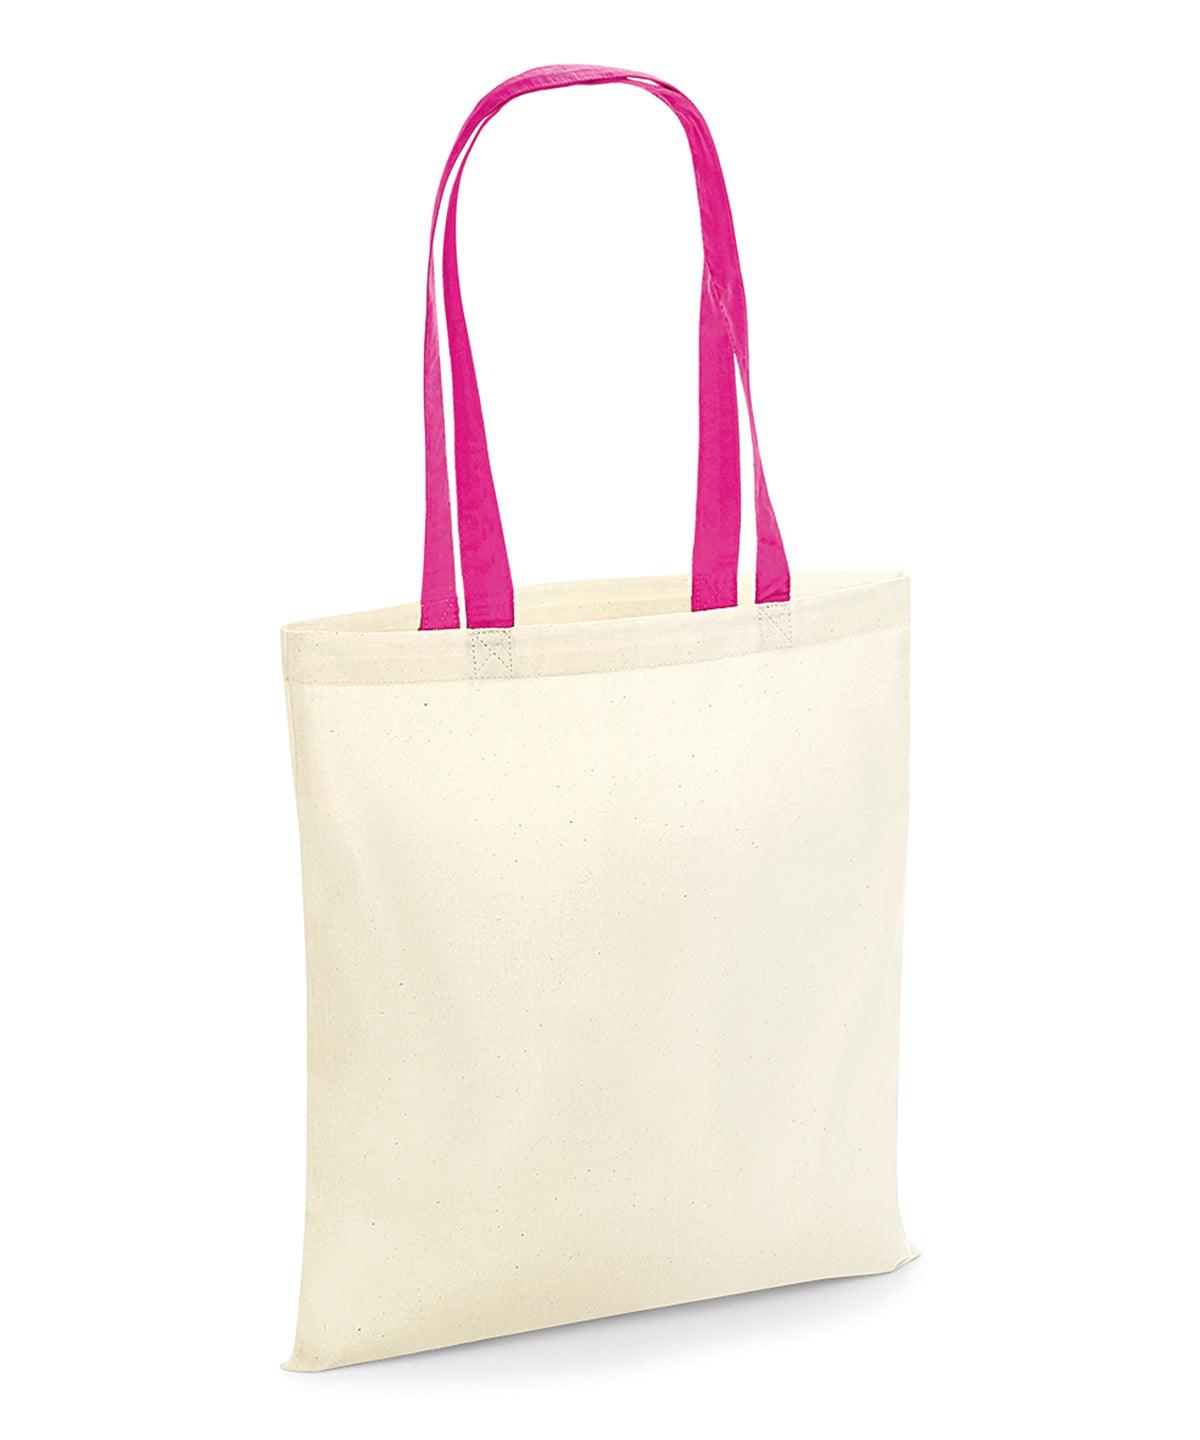 Natural/Fuchsia - Bag for life - contrast handles Bags Westford Mill Bags & Luggage Schoolwear Centres